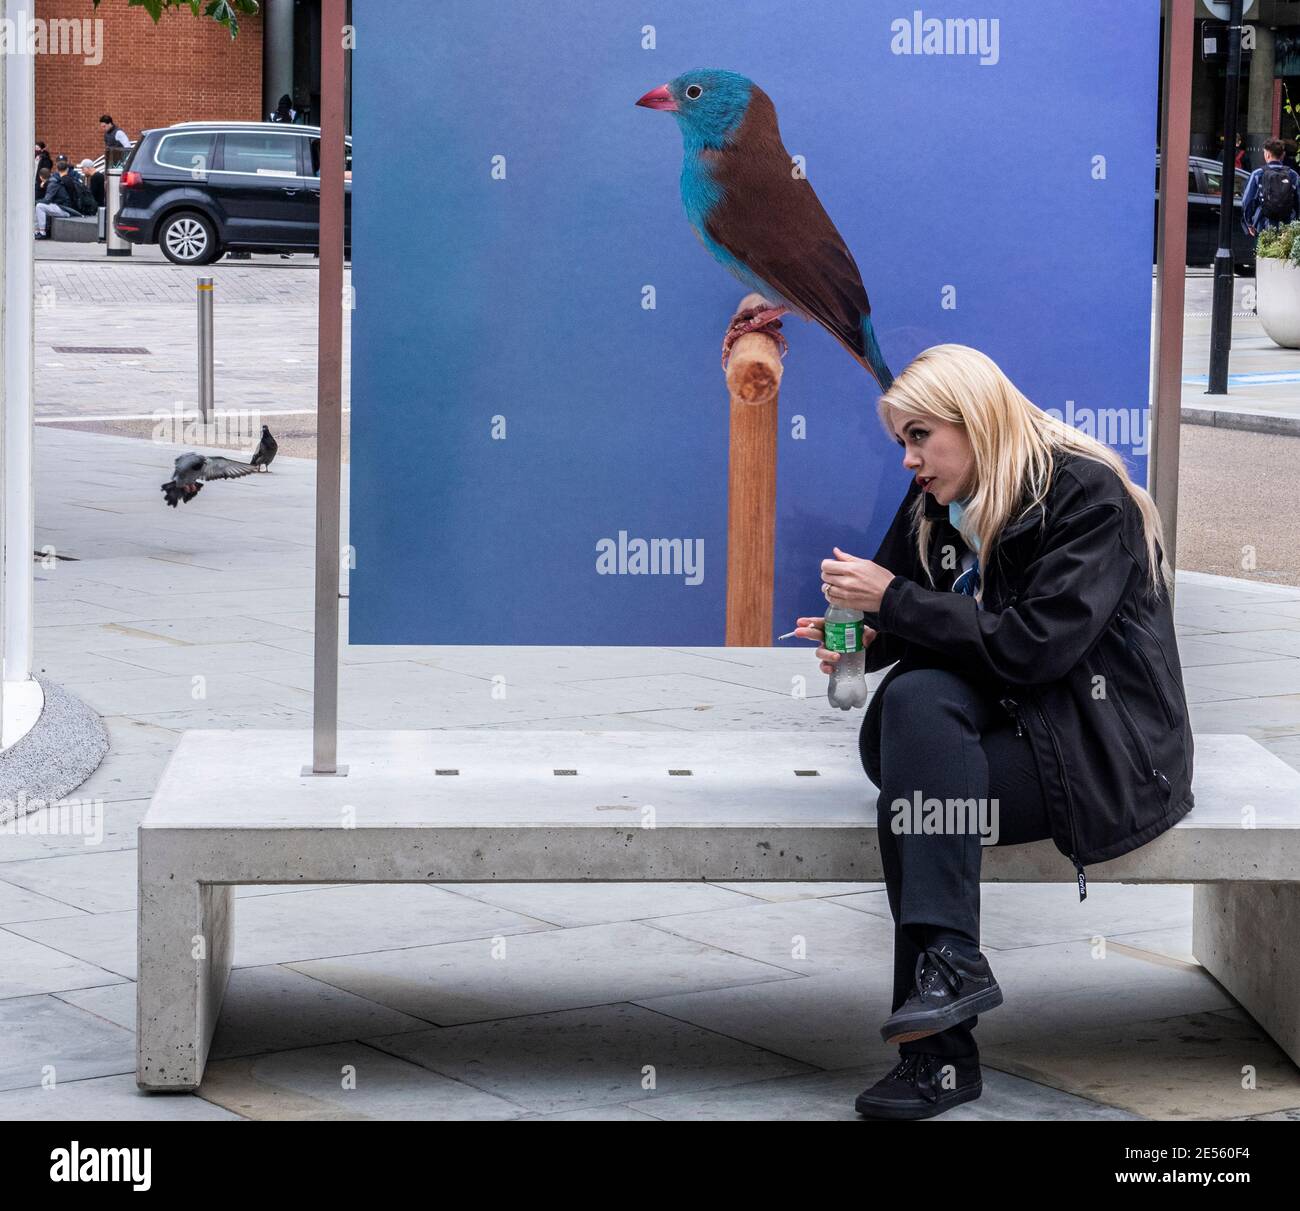 Young woman sitting on bench using phone with picture of bird behind her near Kings Cross. Stock Photo